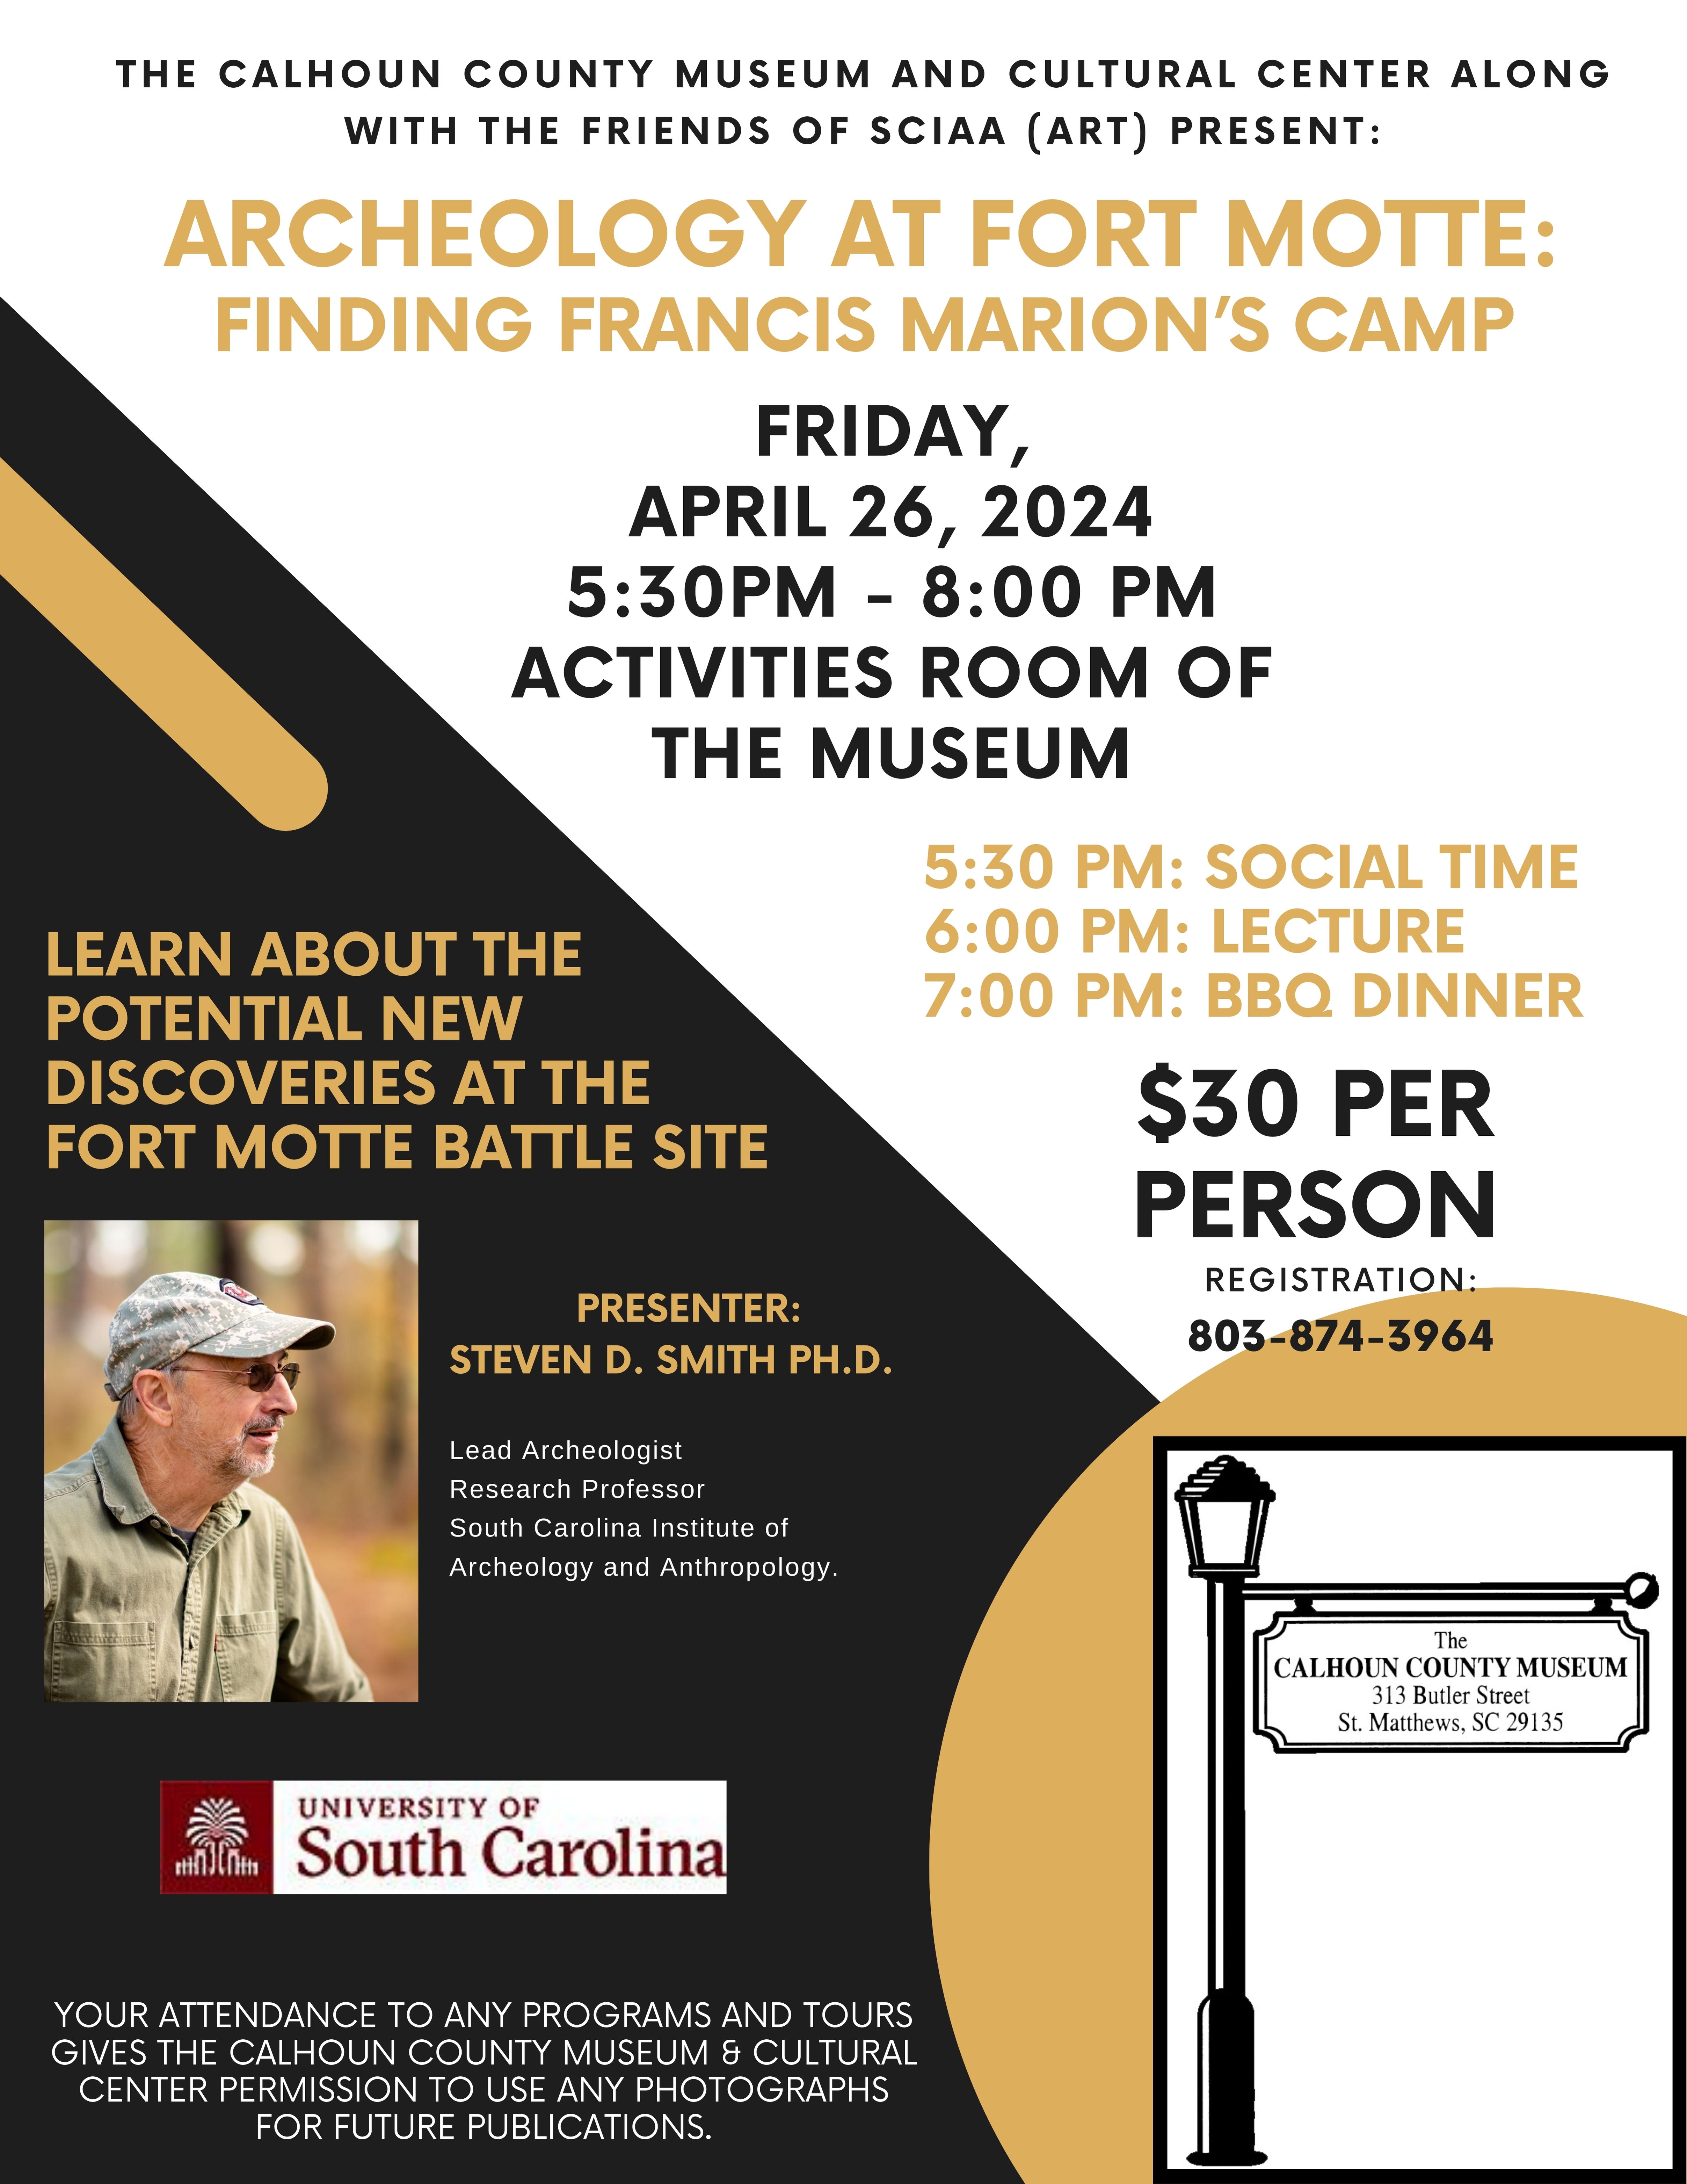 Museum to present "Finding Francis Marion's Camp"